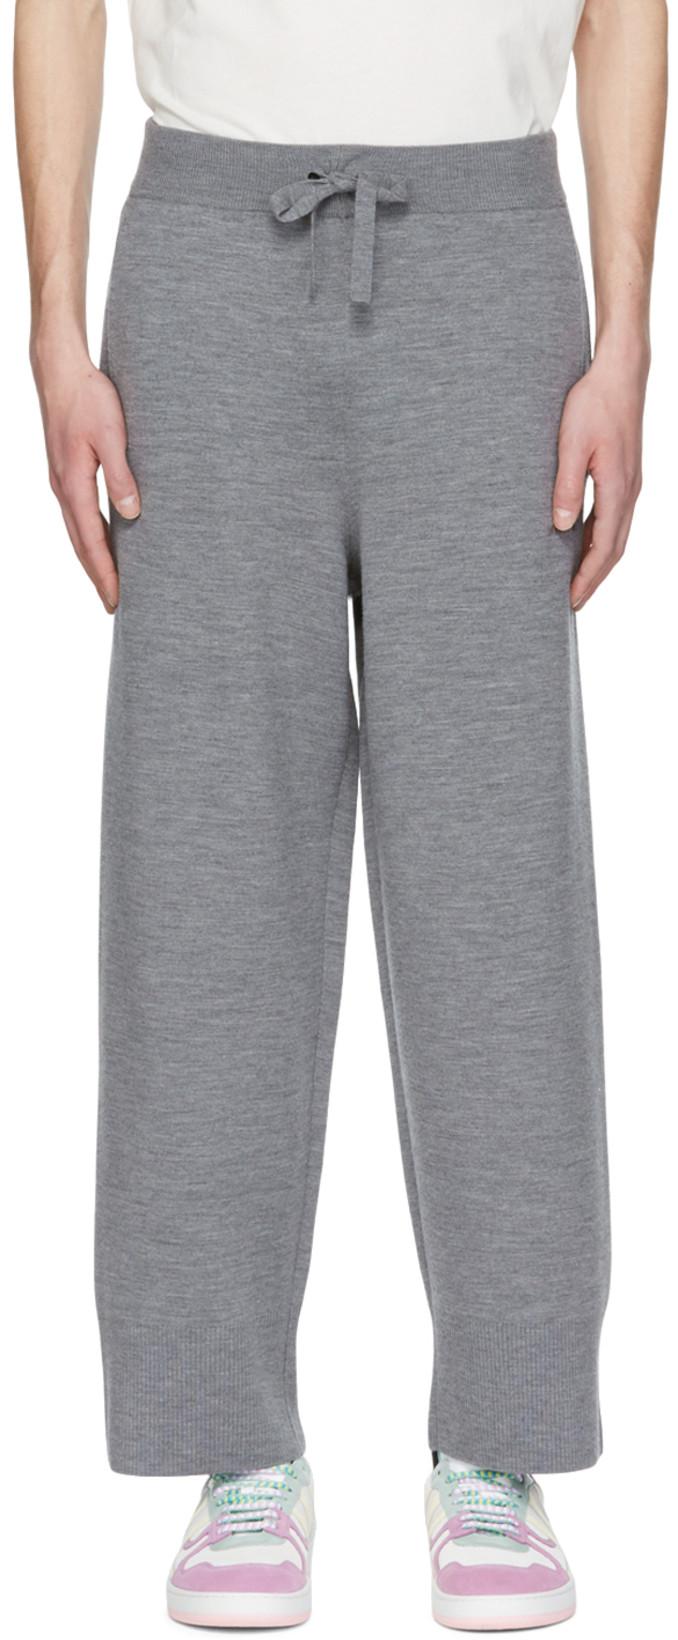 Grey Wool Lounge Pants by A PERSONAL NOTE 73